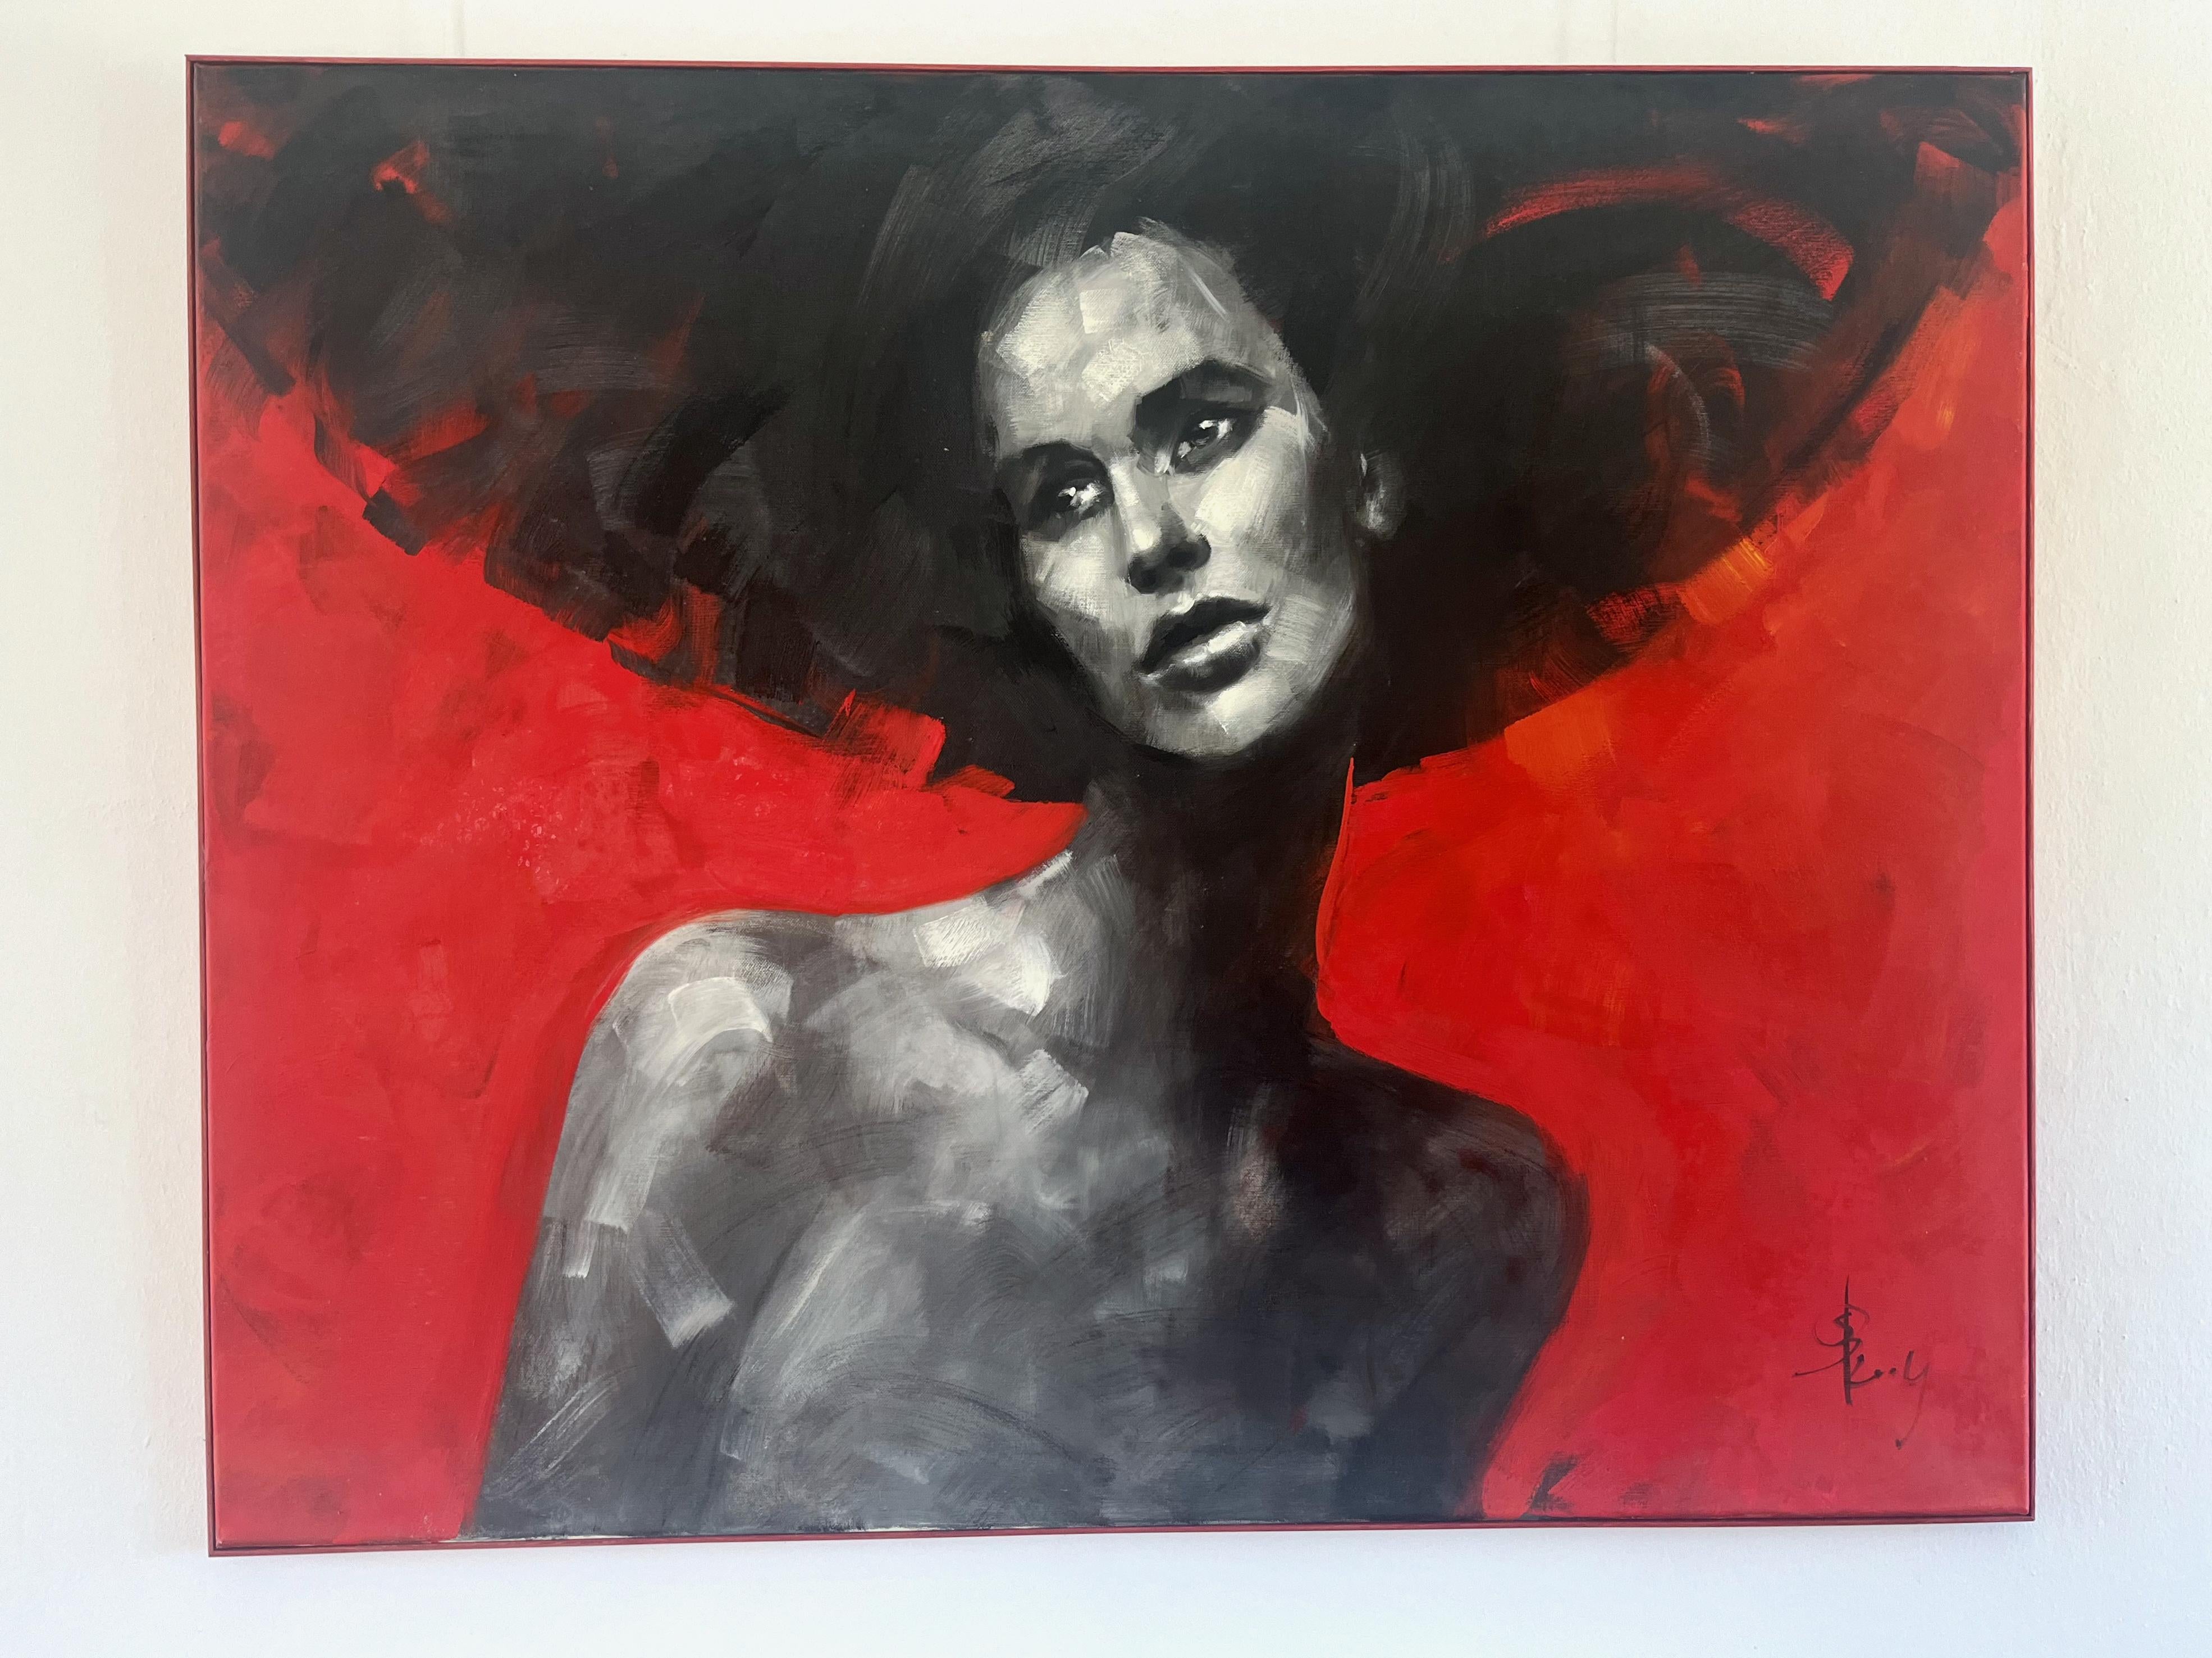 This artwork is already framed. They are simple, modern red strip frames.

Renata Brzozowska is born in the city of Gorzów Wielkopolski, Poland, Renata paints and draws since childhood. She graduated the University of Art in Poznań. After years of